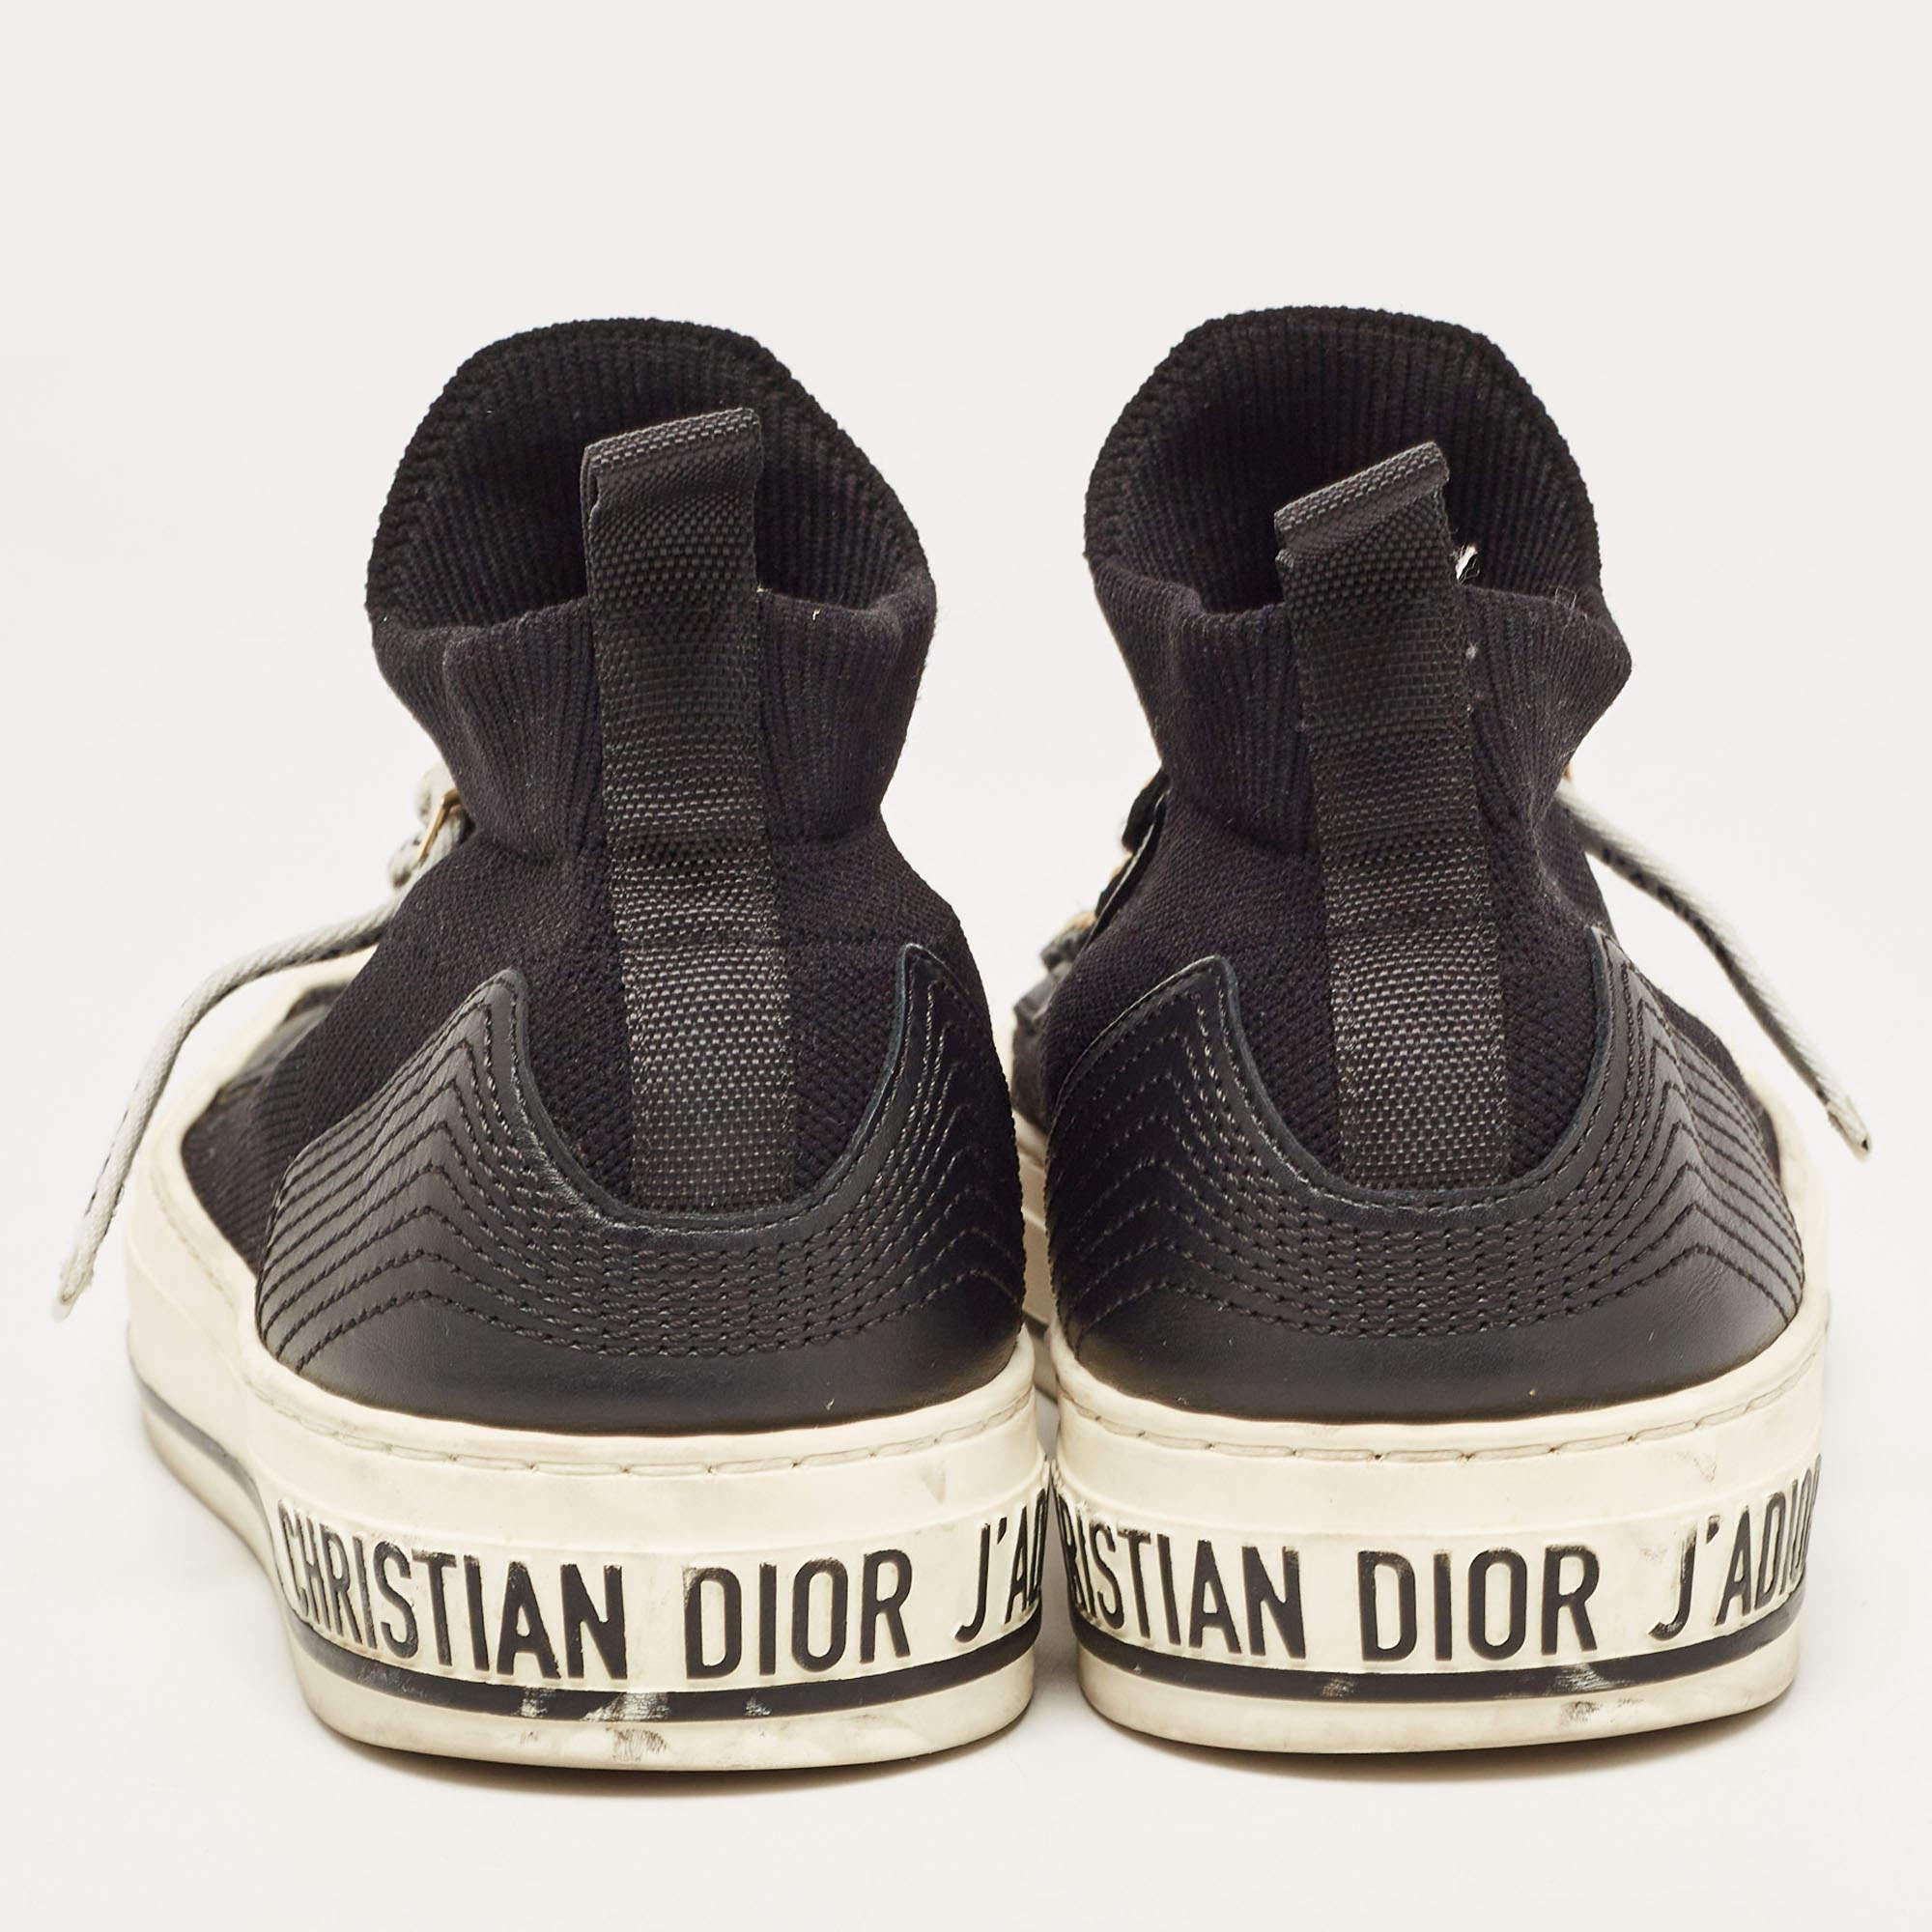 Add a statement appeal to your outfit with these Dior sneakers. Made from fabric and leather, they feature lace-up vamps, a brand signature on the uppers, and comfortable insoles. The leather sole of this high-top pair aims to provide you with